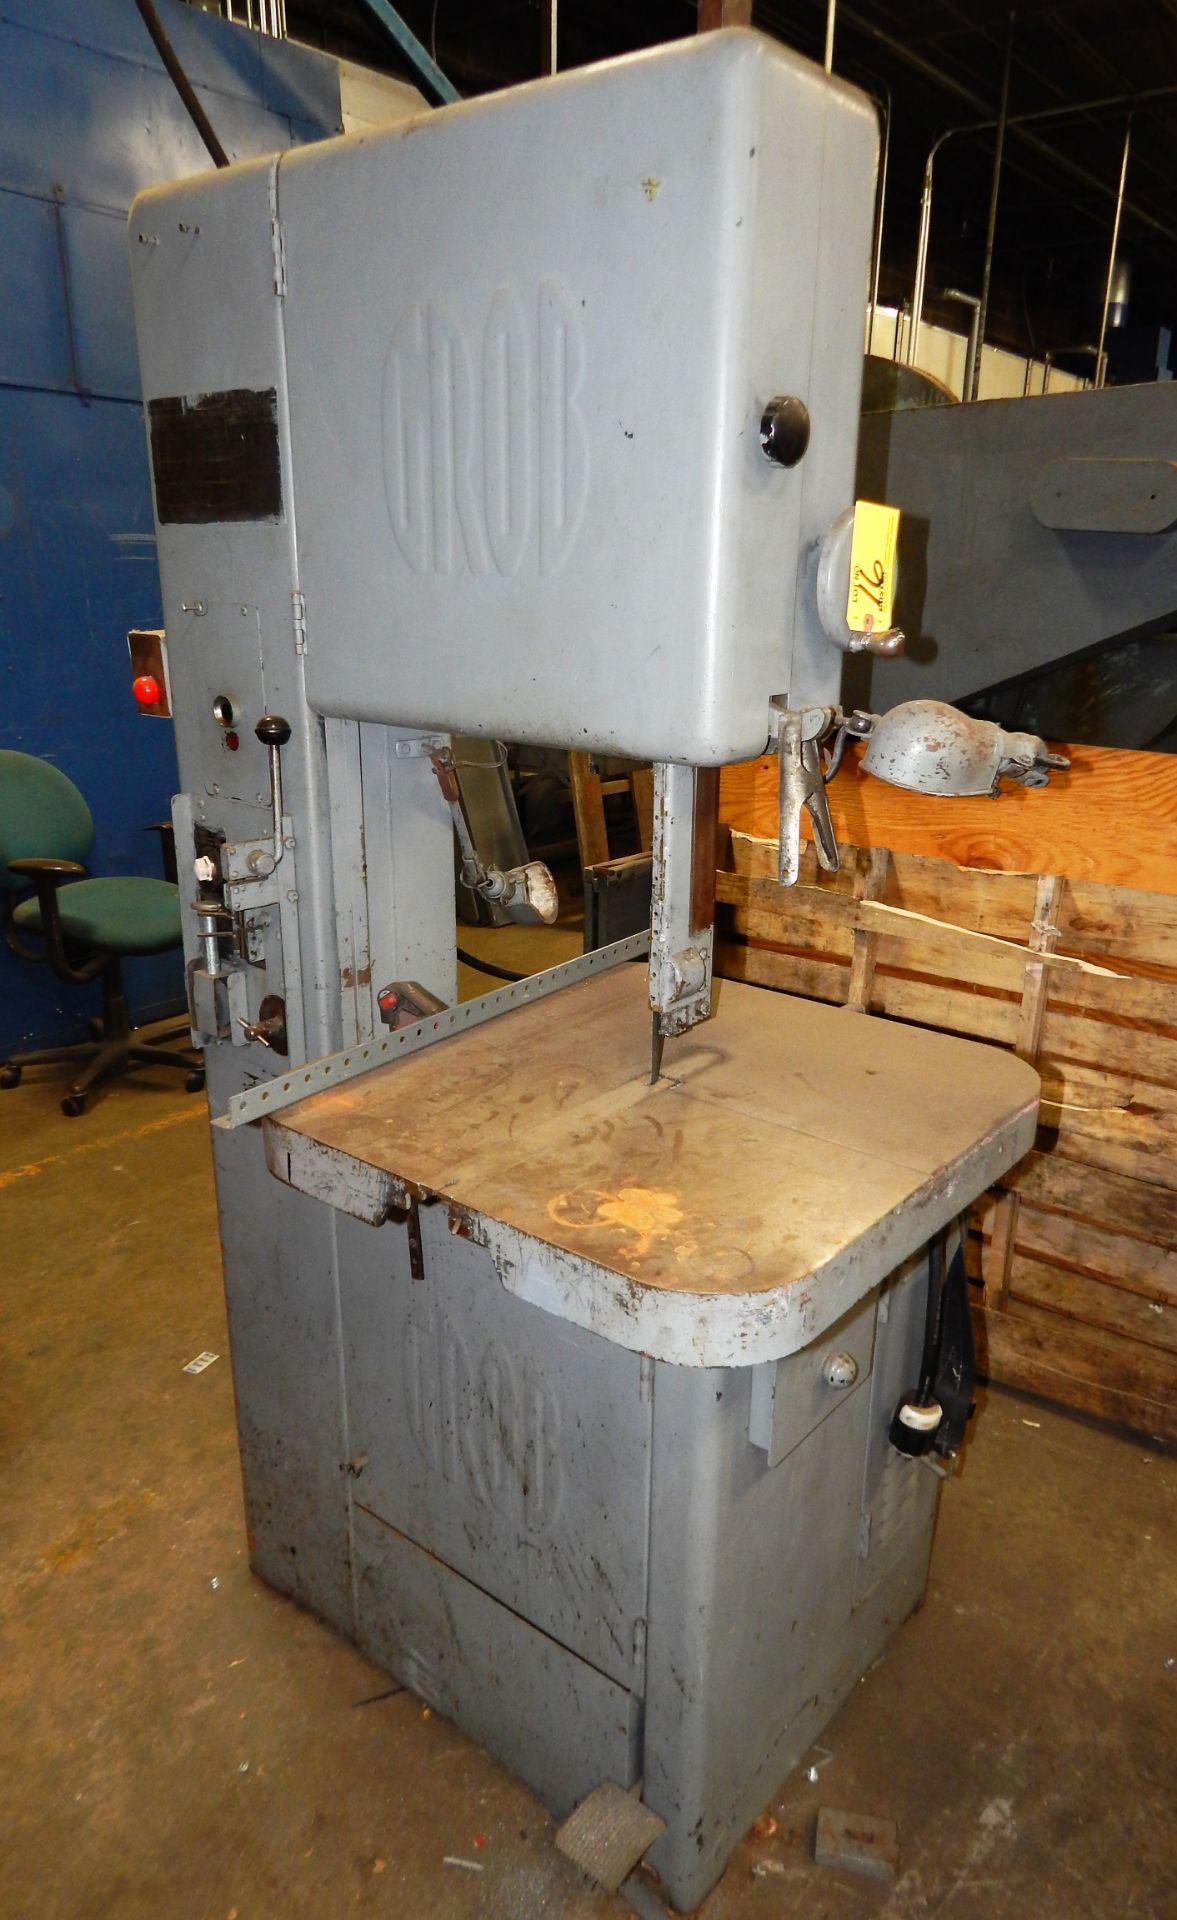 GROB 18'' VERTICAL BANDSAW WITH BLADE WELDING GRINDING ATTACHEMENT, 24'' X 24'' TABLE, 50-2030 FPM